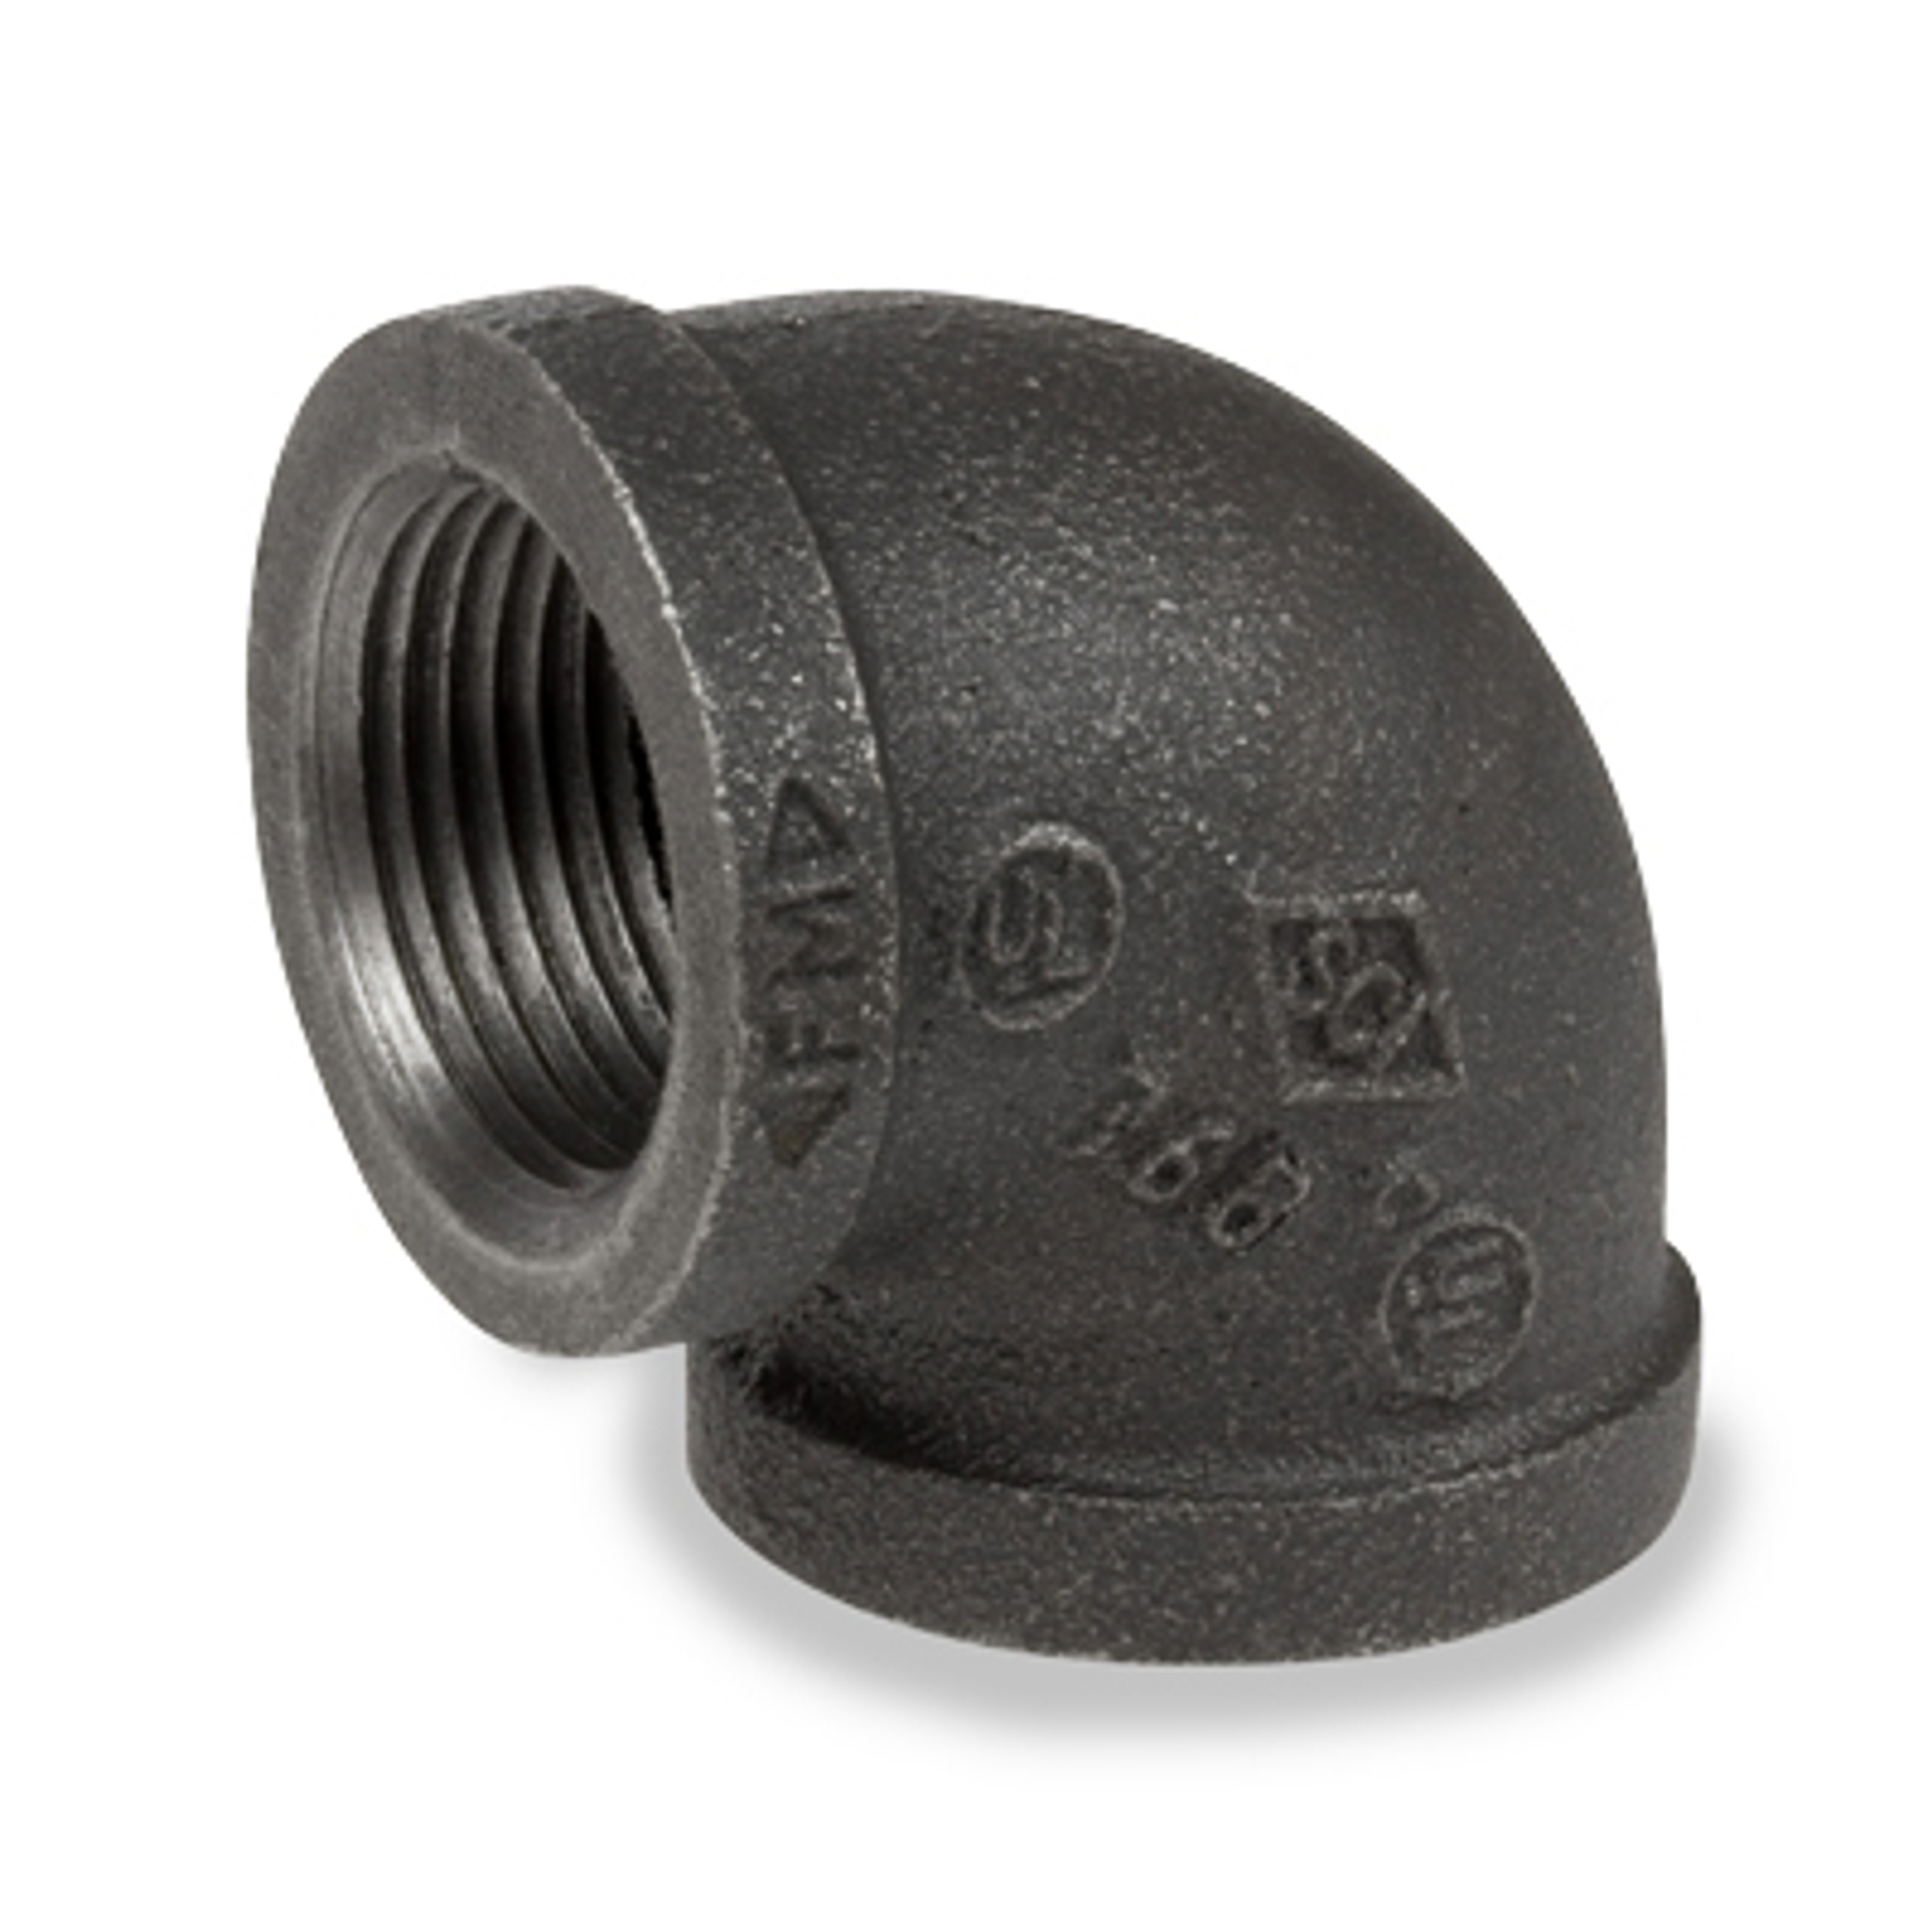 Pipe Fittings - Ductile Iron 1-1/4" 45 Degree Elbows NPT 300#